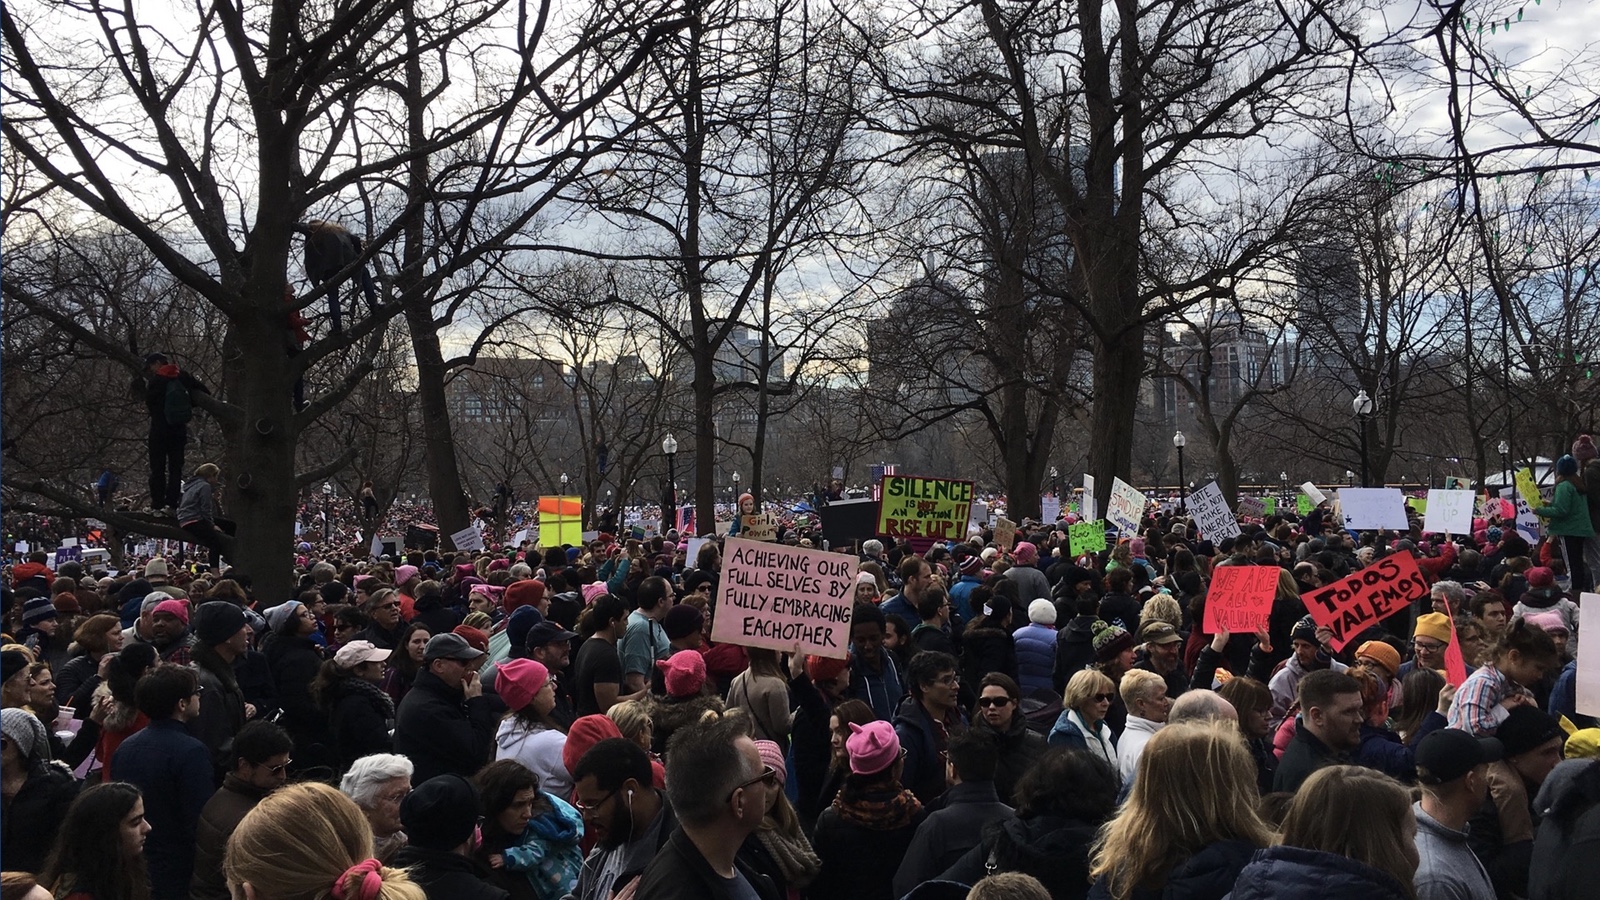 Protesters gathered in the Boston Common at the Women's March on Jnauary 21, 2017.